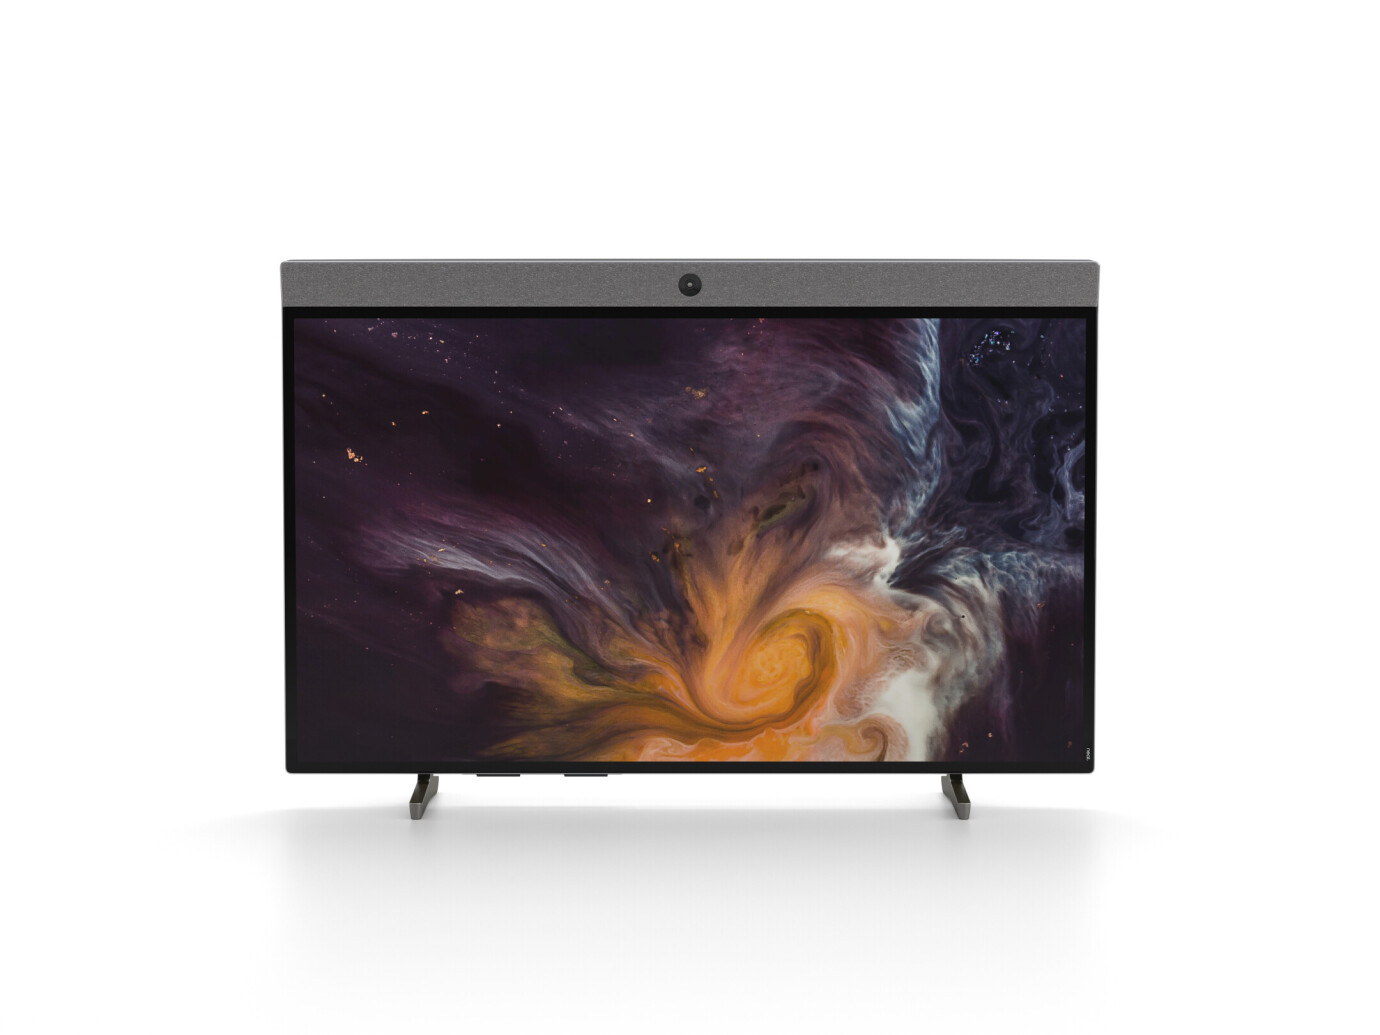 Neat Board 65" Multi-Touch Display